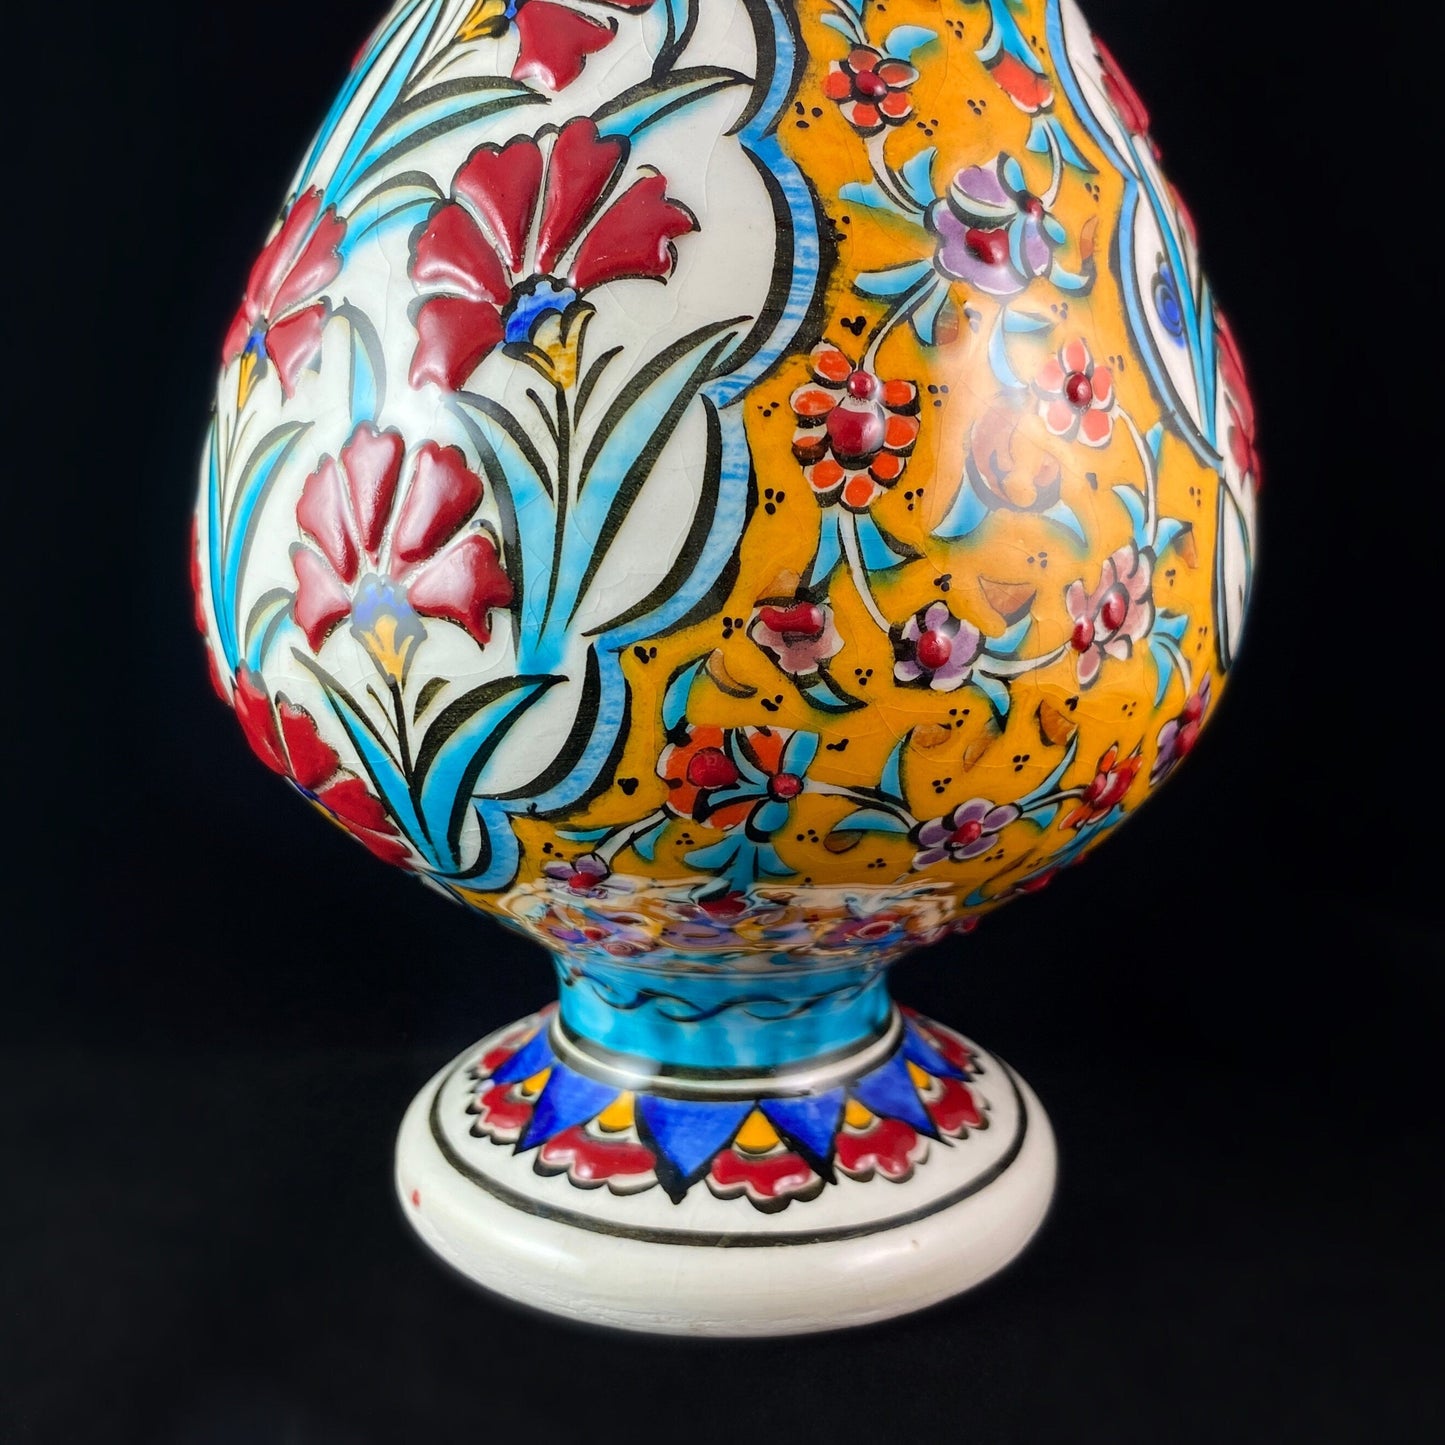 Handmade Vase, Functional and Decorative Turkish Pottery, Cottagecore Style, Blue and Yellow